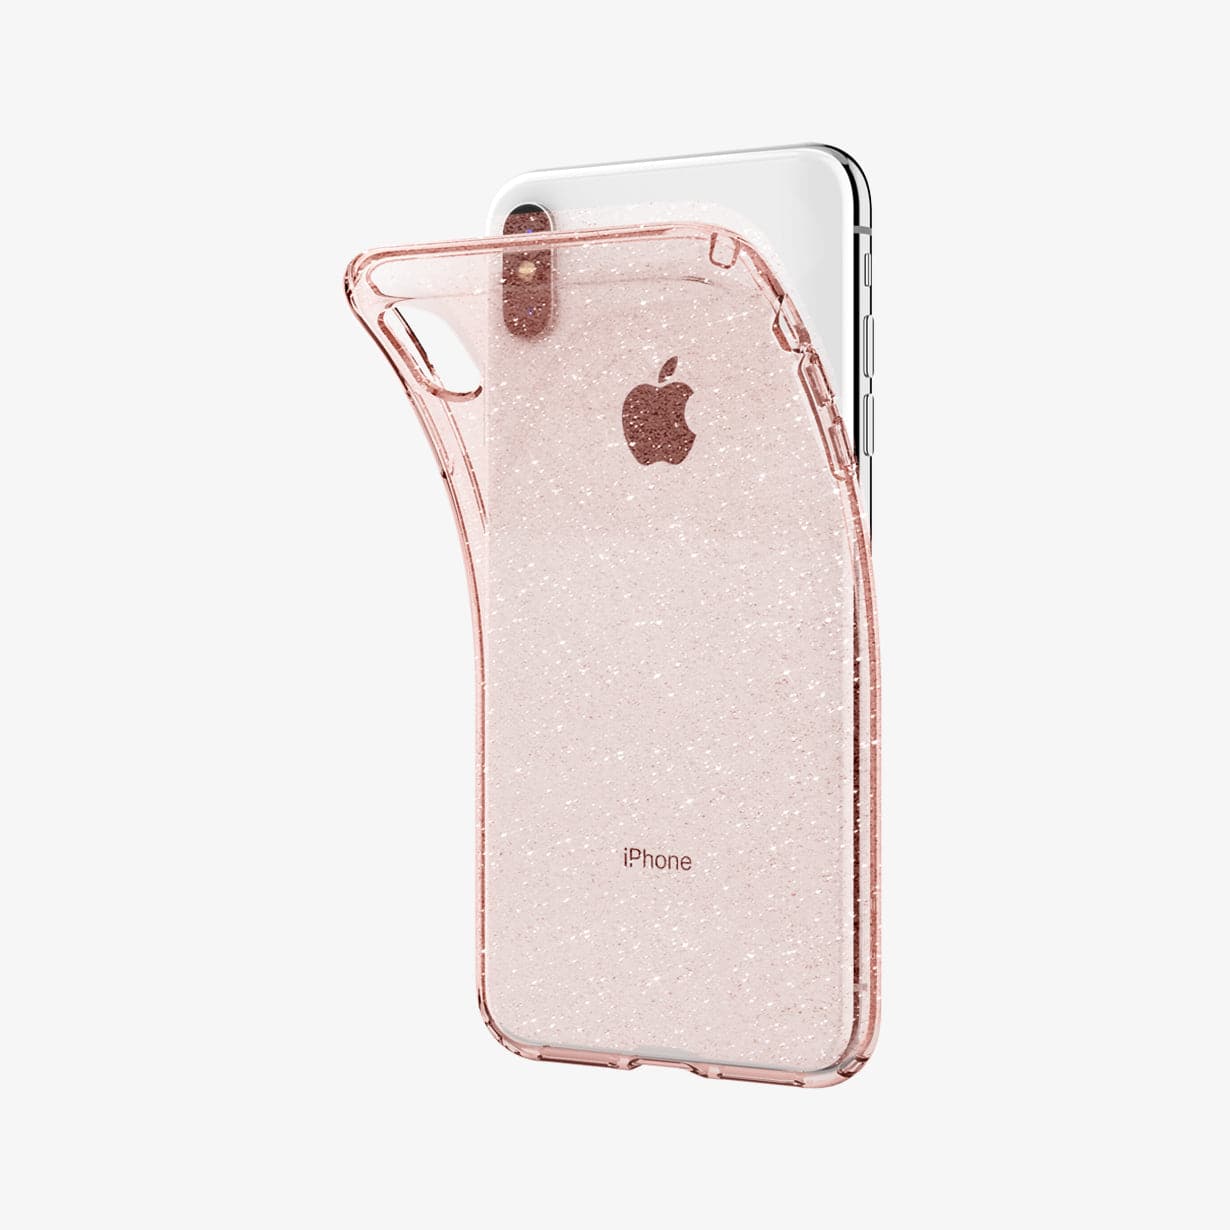 065CS25124 - iPhone XS Max Case Liquid Crystal Glitter in rose quartz showing the back with case bending away from device